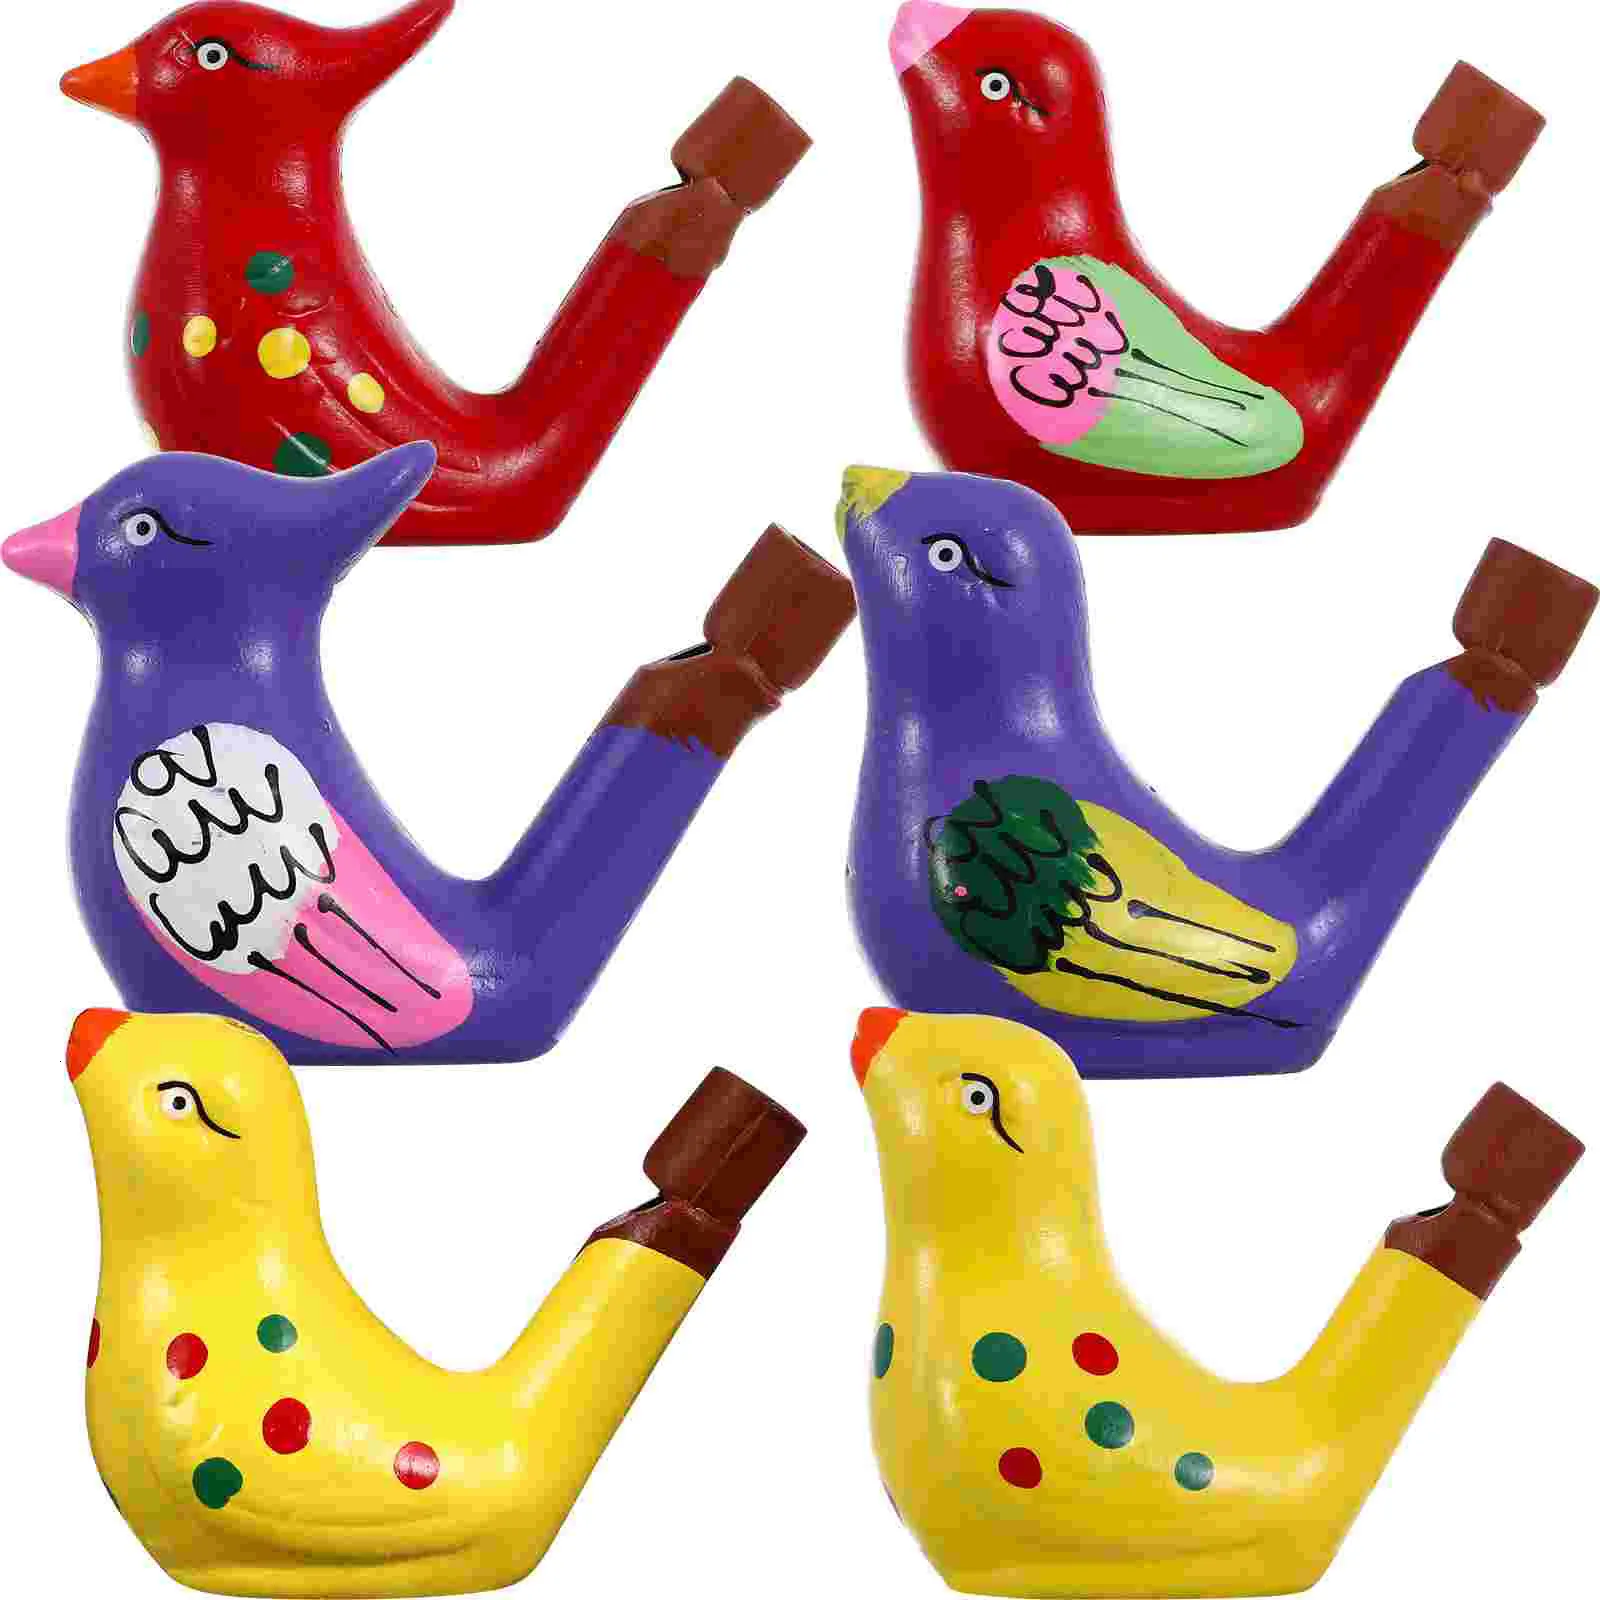 Noise Maker Ceramic Water Whistles Bath Gifts Kids Bird Makers Party Favors Toy s 230411